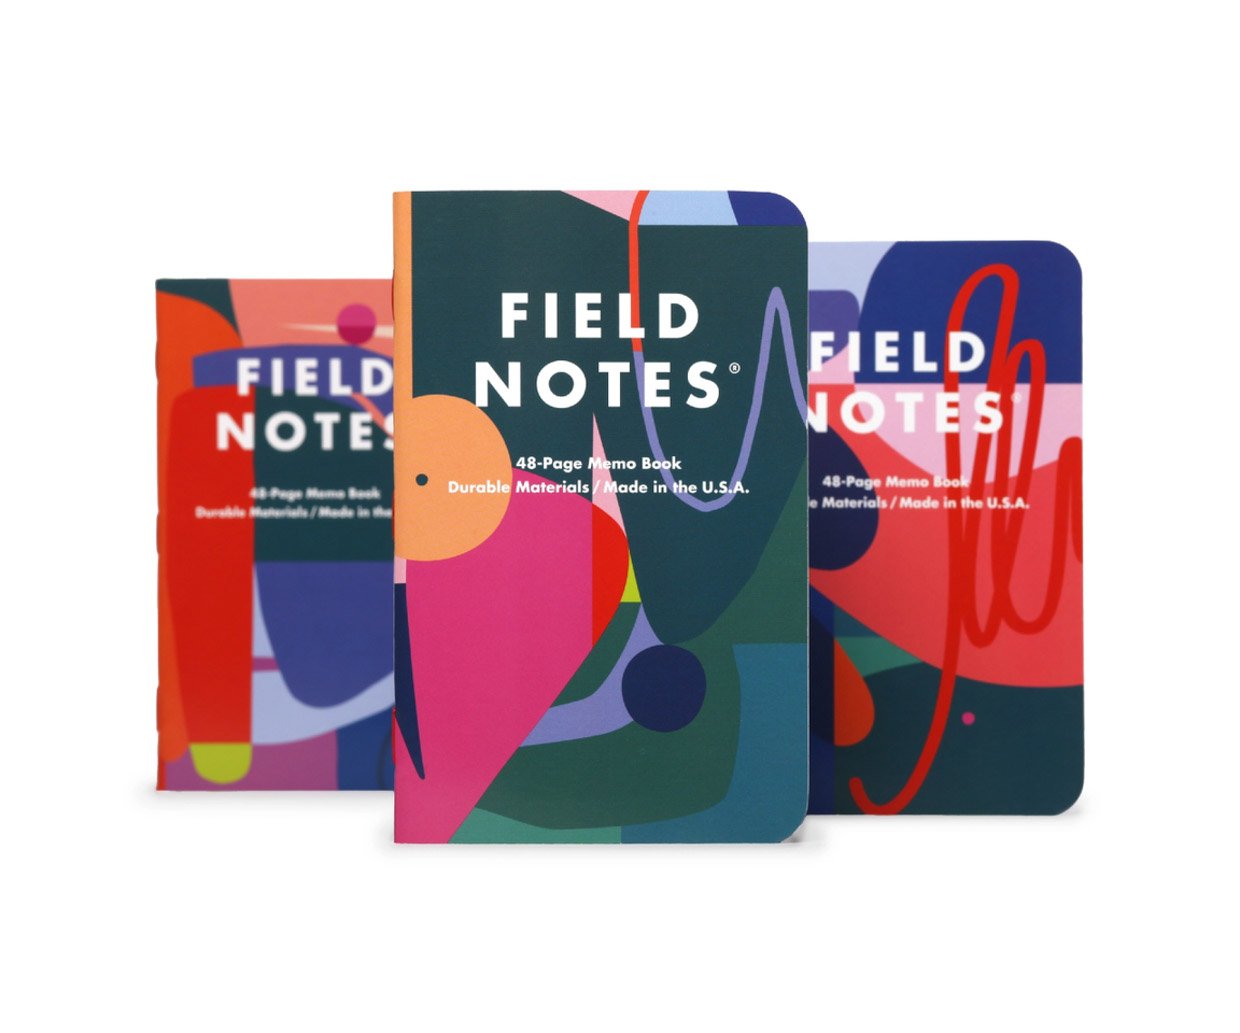 Field Notes Flora Edition Notebooks